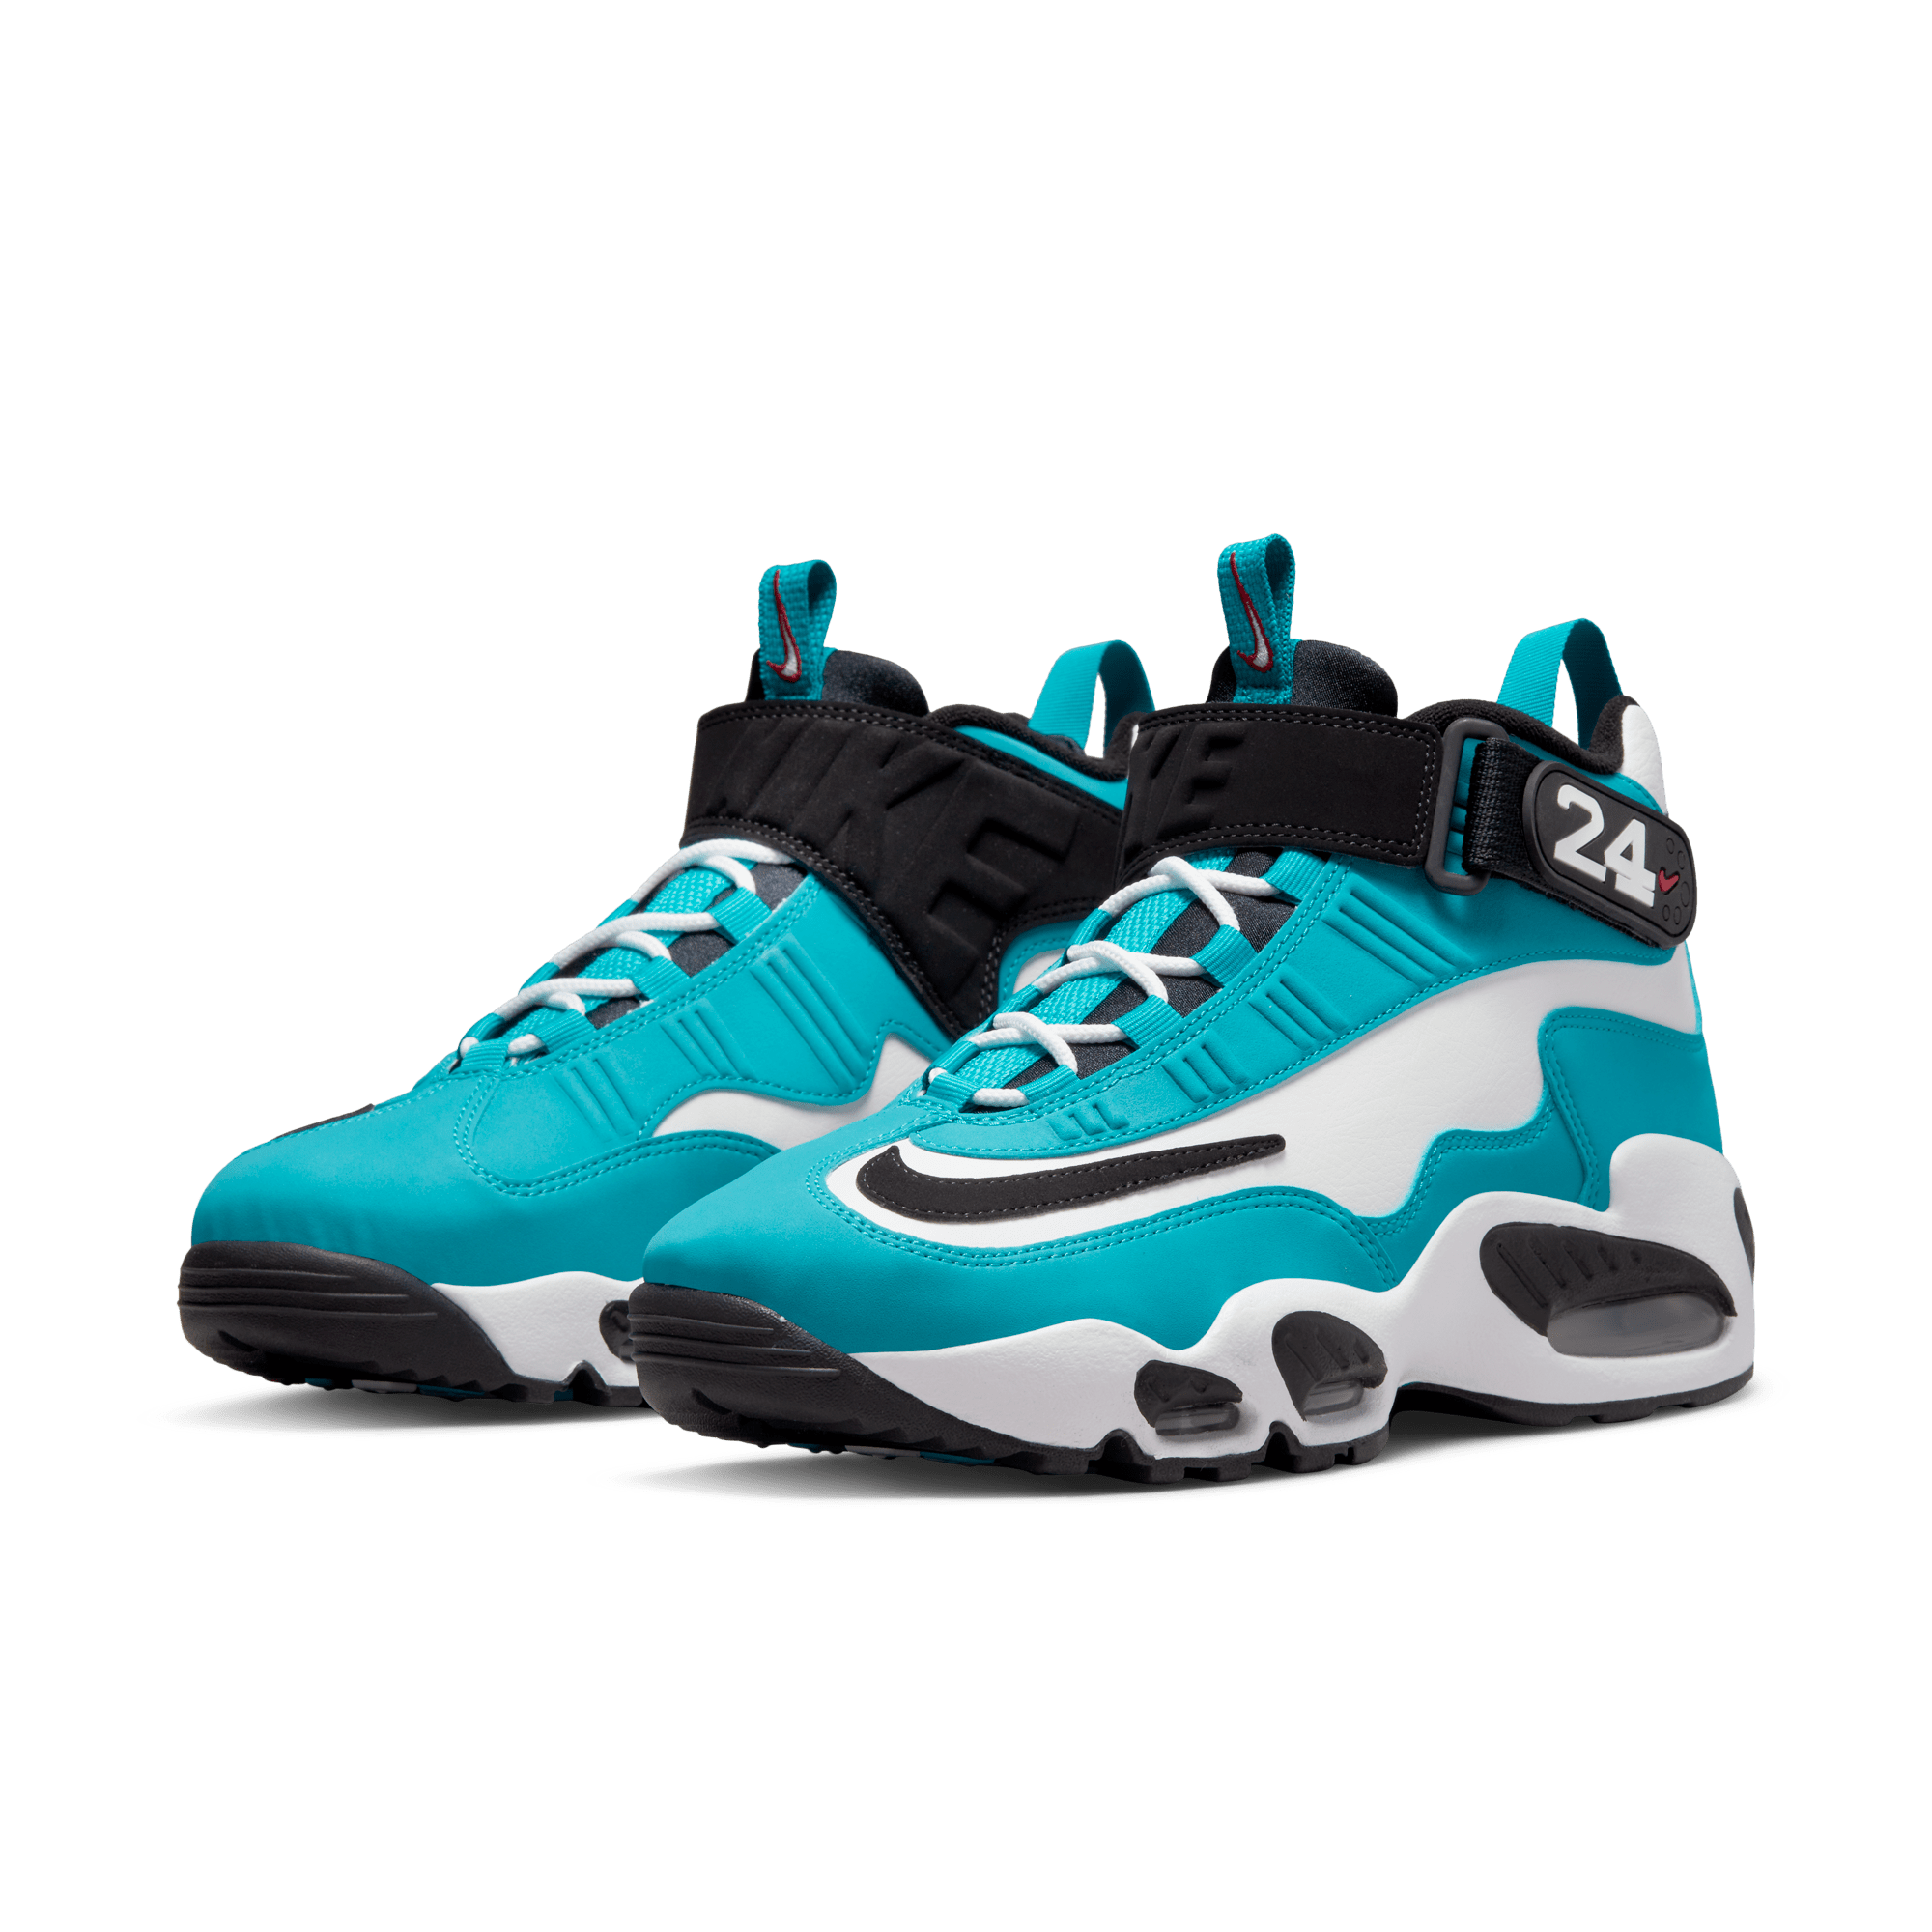 Men's Nike Air Griffey Max 1 Training Shoes